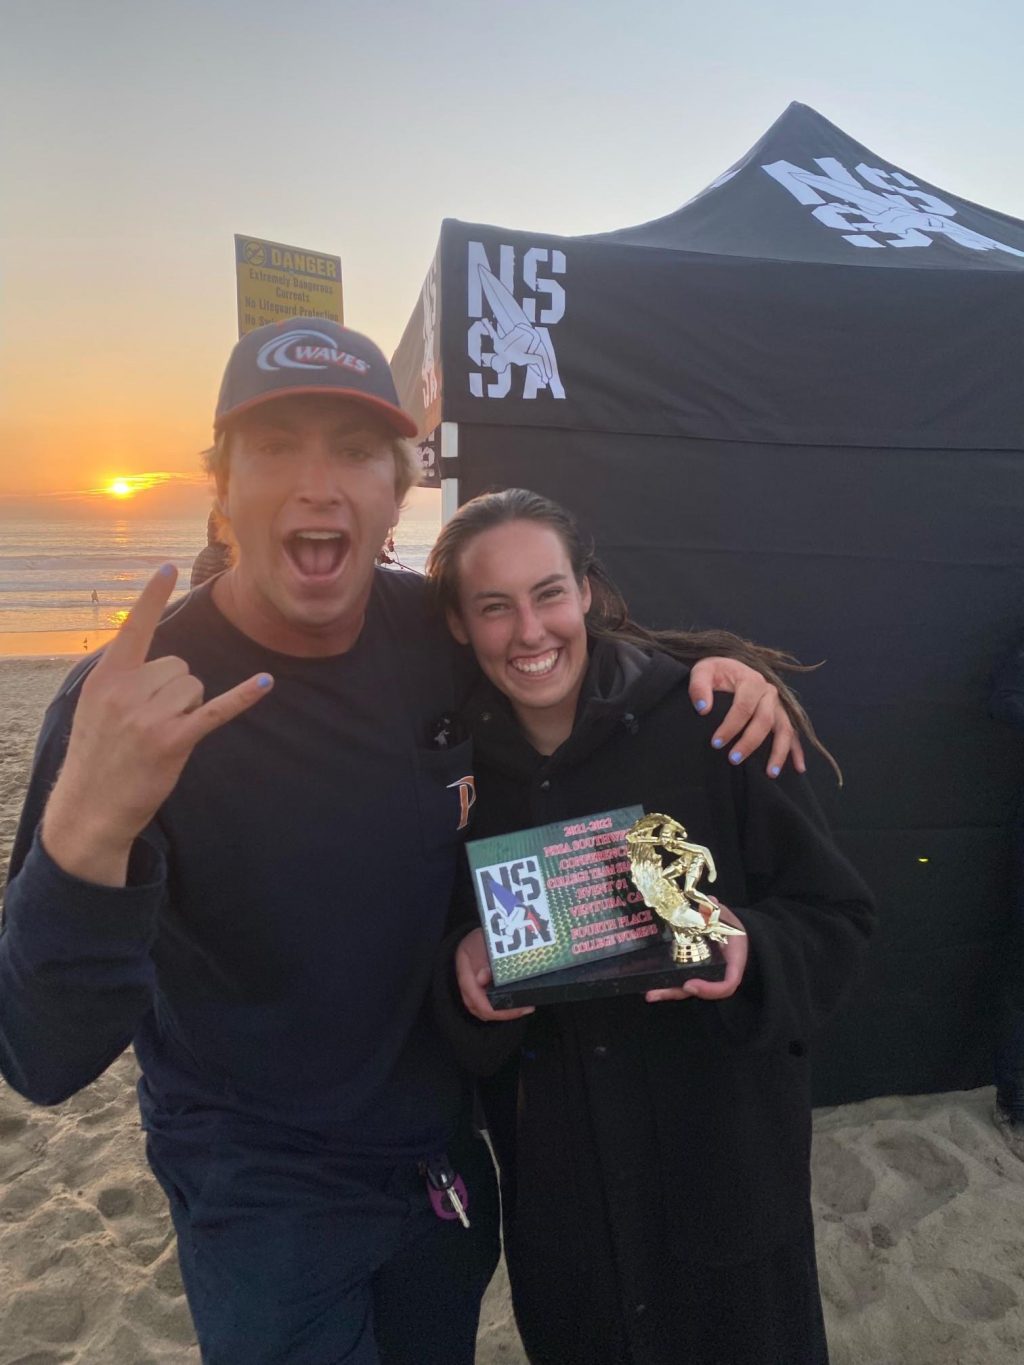 Sophomore Natalie Alderton (right) takes a picture with Head Coach Joseph Rickabaugh after the NSSA Ventura Harbor Contest on Nov. 7. Proodian said the team had known about each other before they met at Pepperdine because of all the surfing competitions they competed in while they were younger.